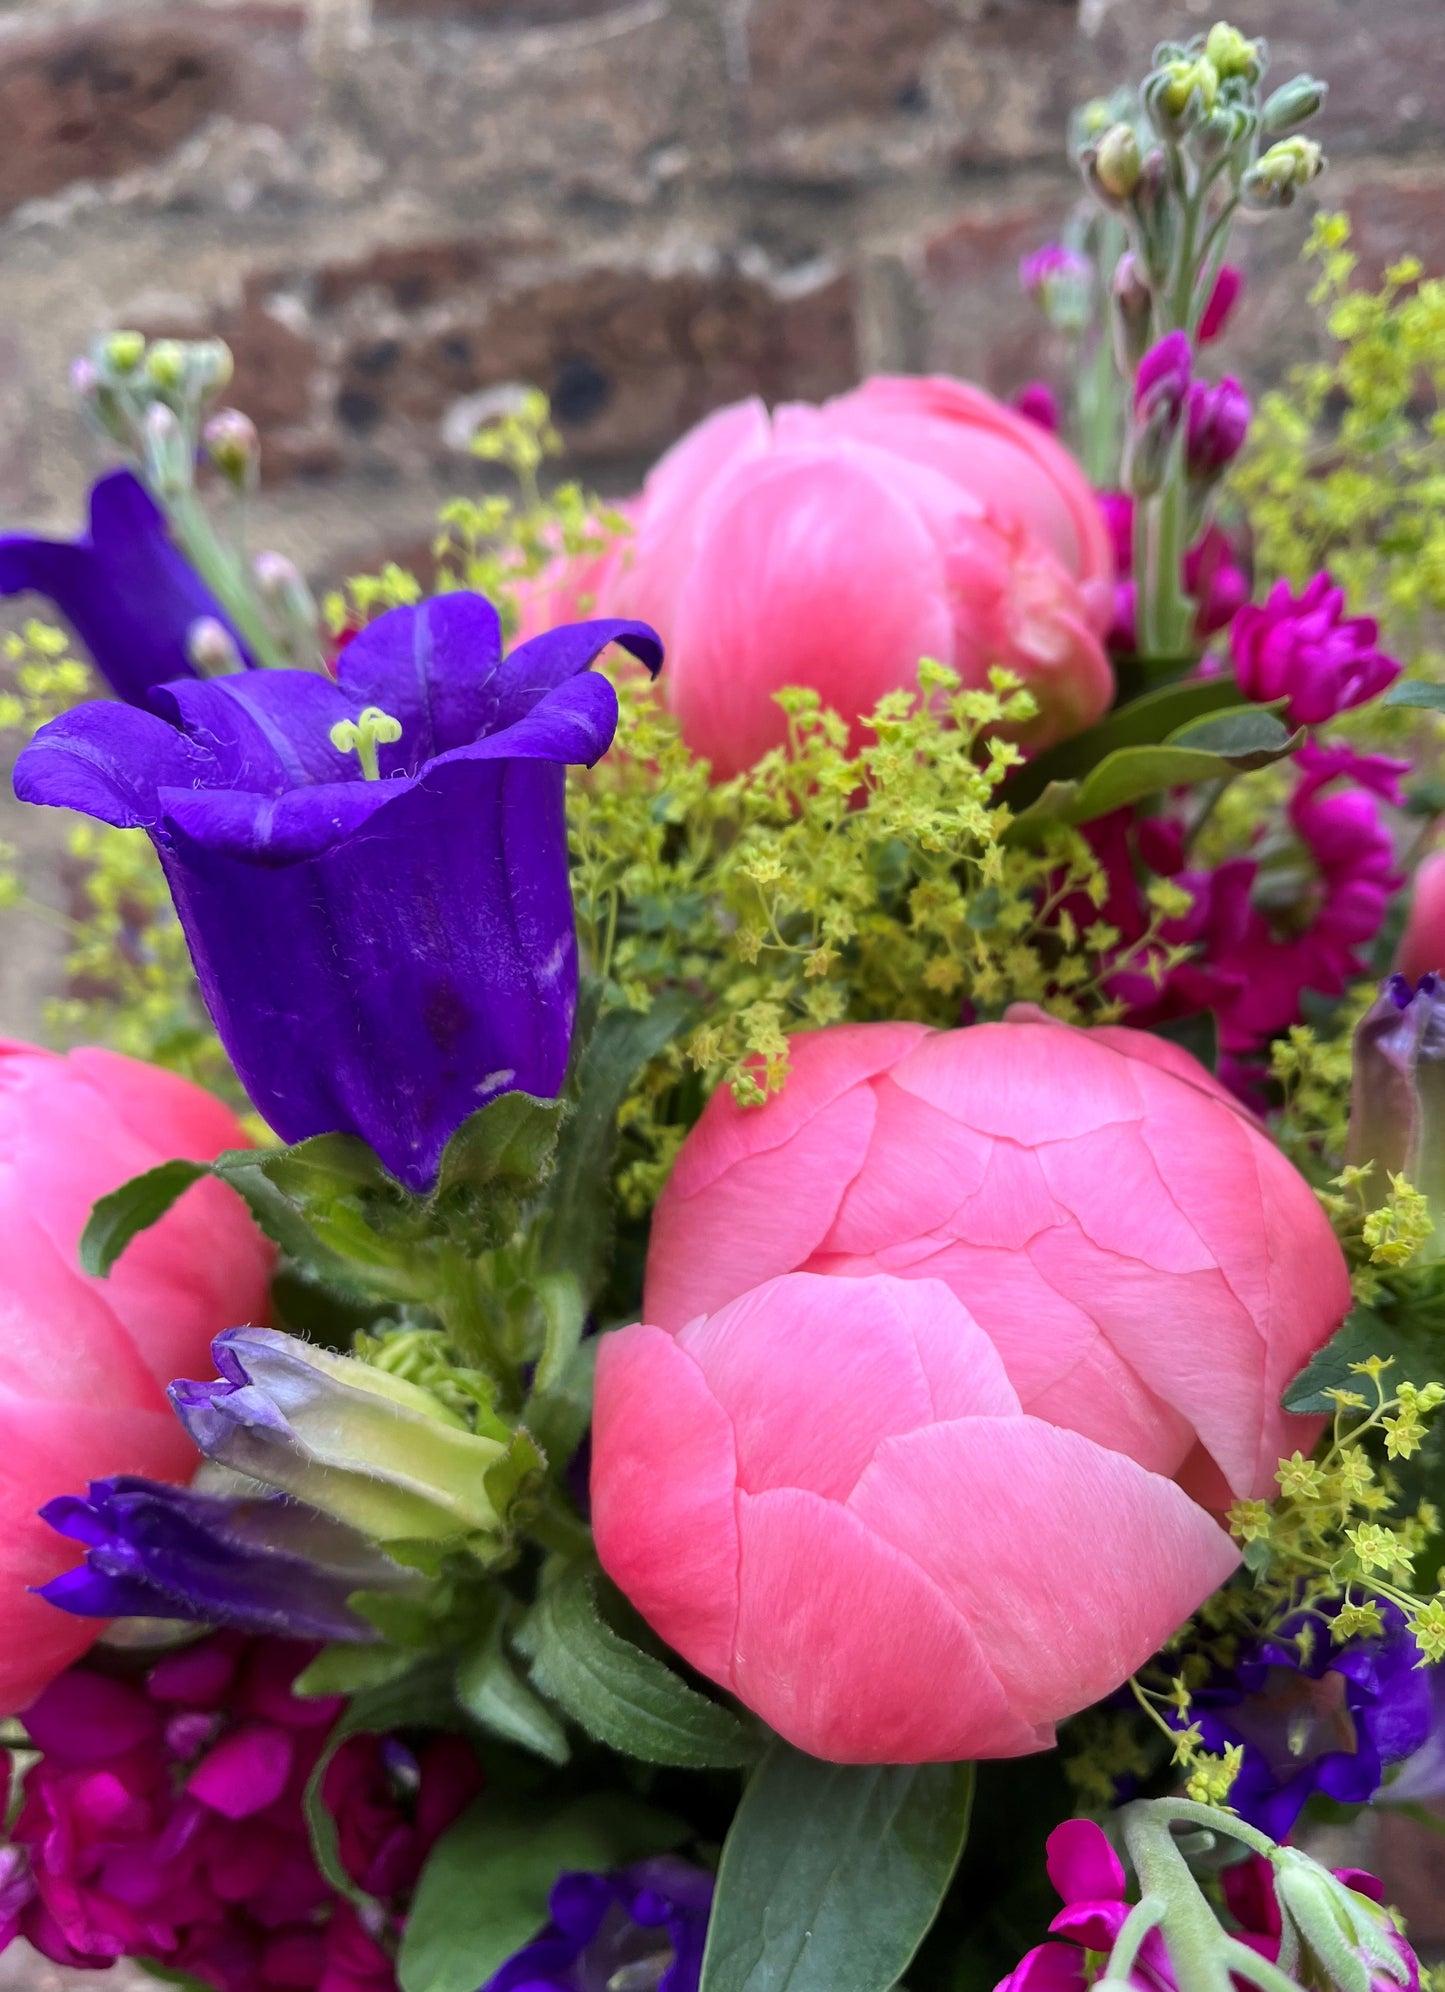 Our pick of the peony bunch